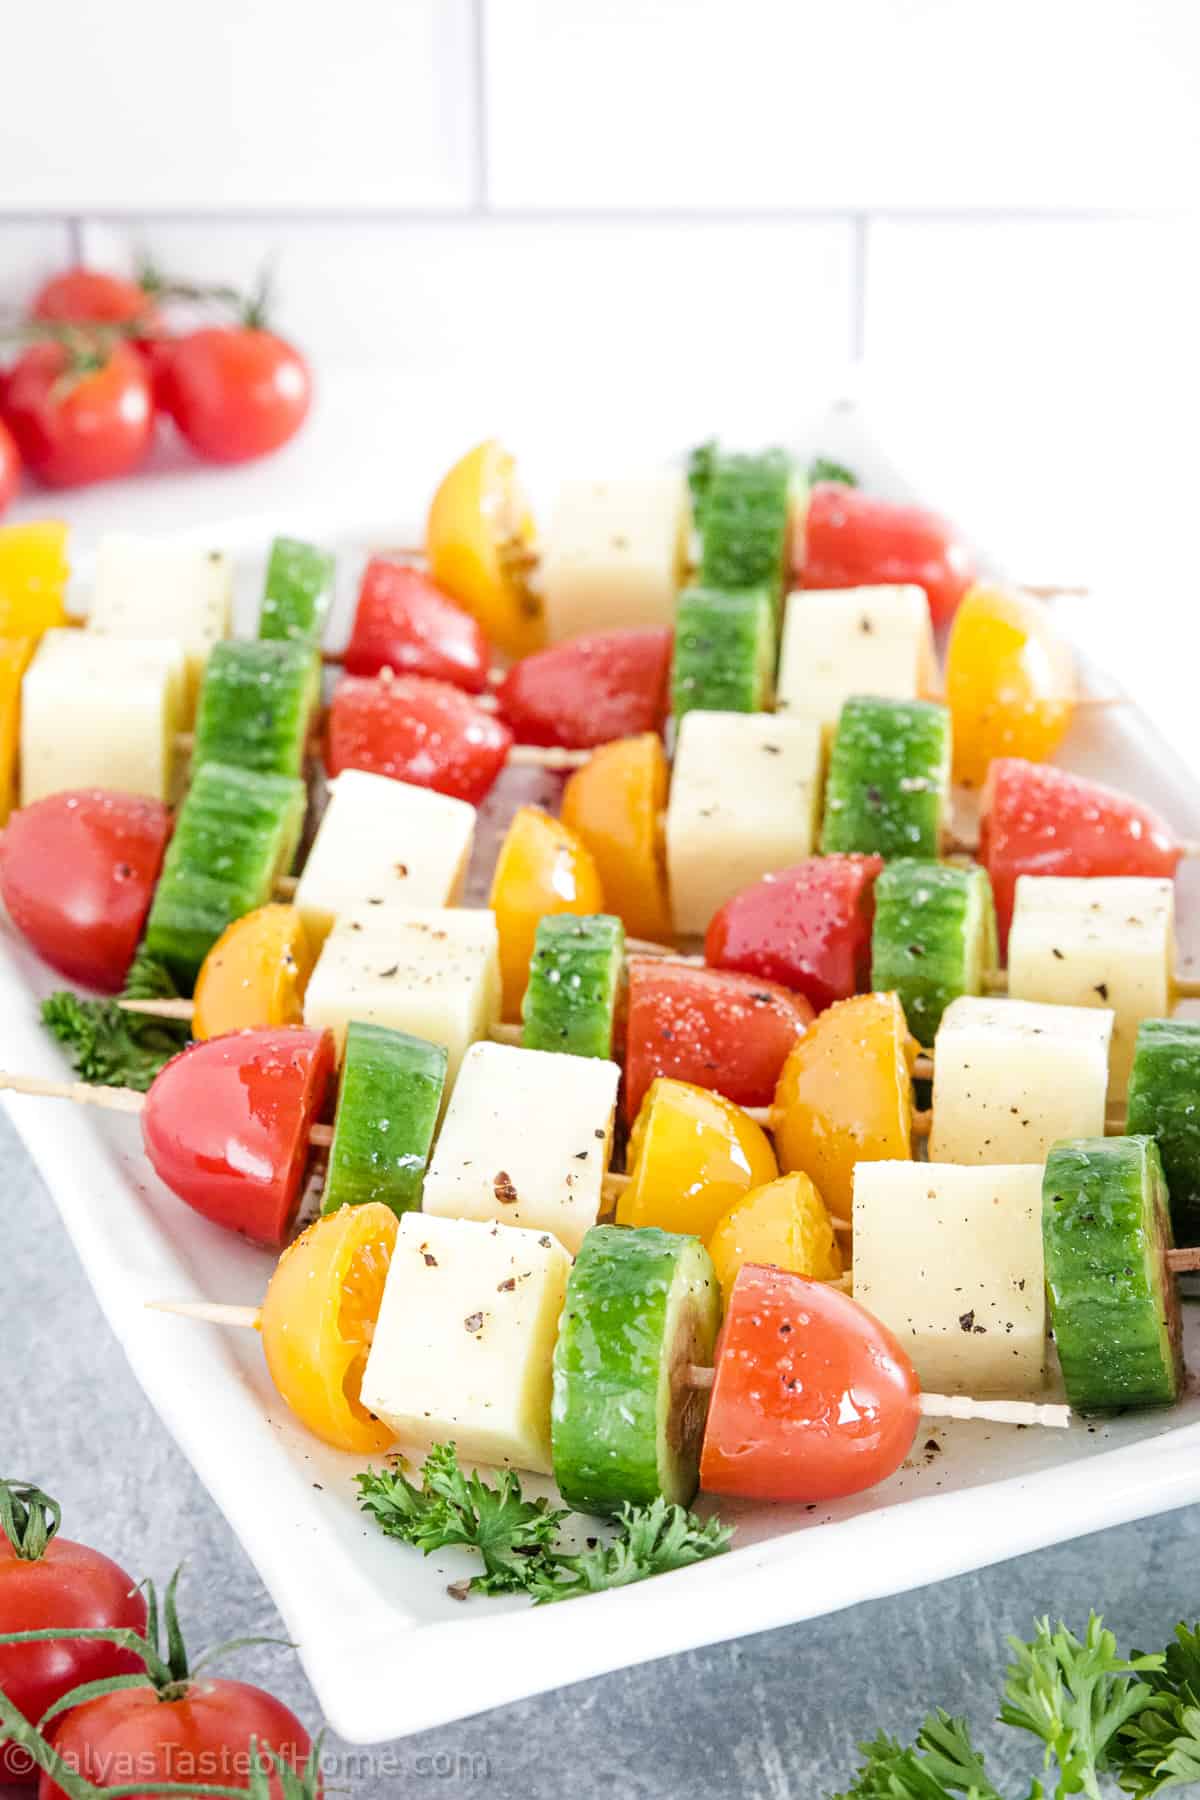 Mozzarella appetizers are a delicious and easy-to-make snack or starter that can be served at any gathering.